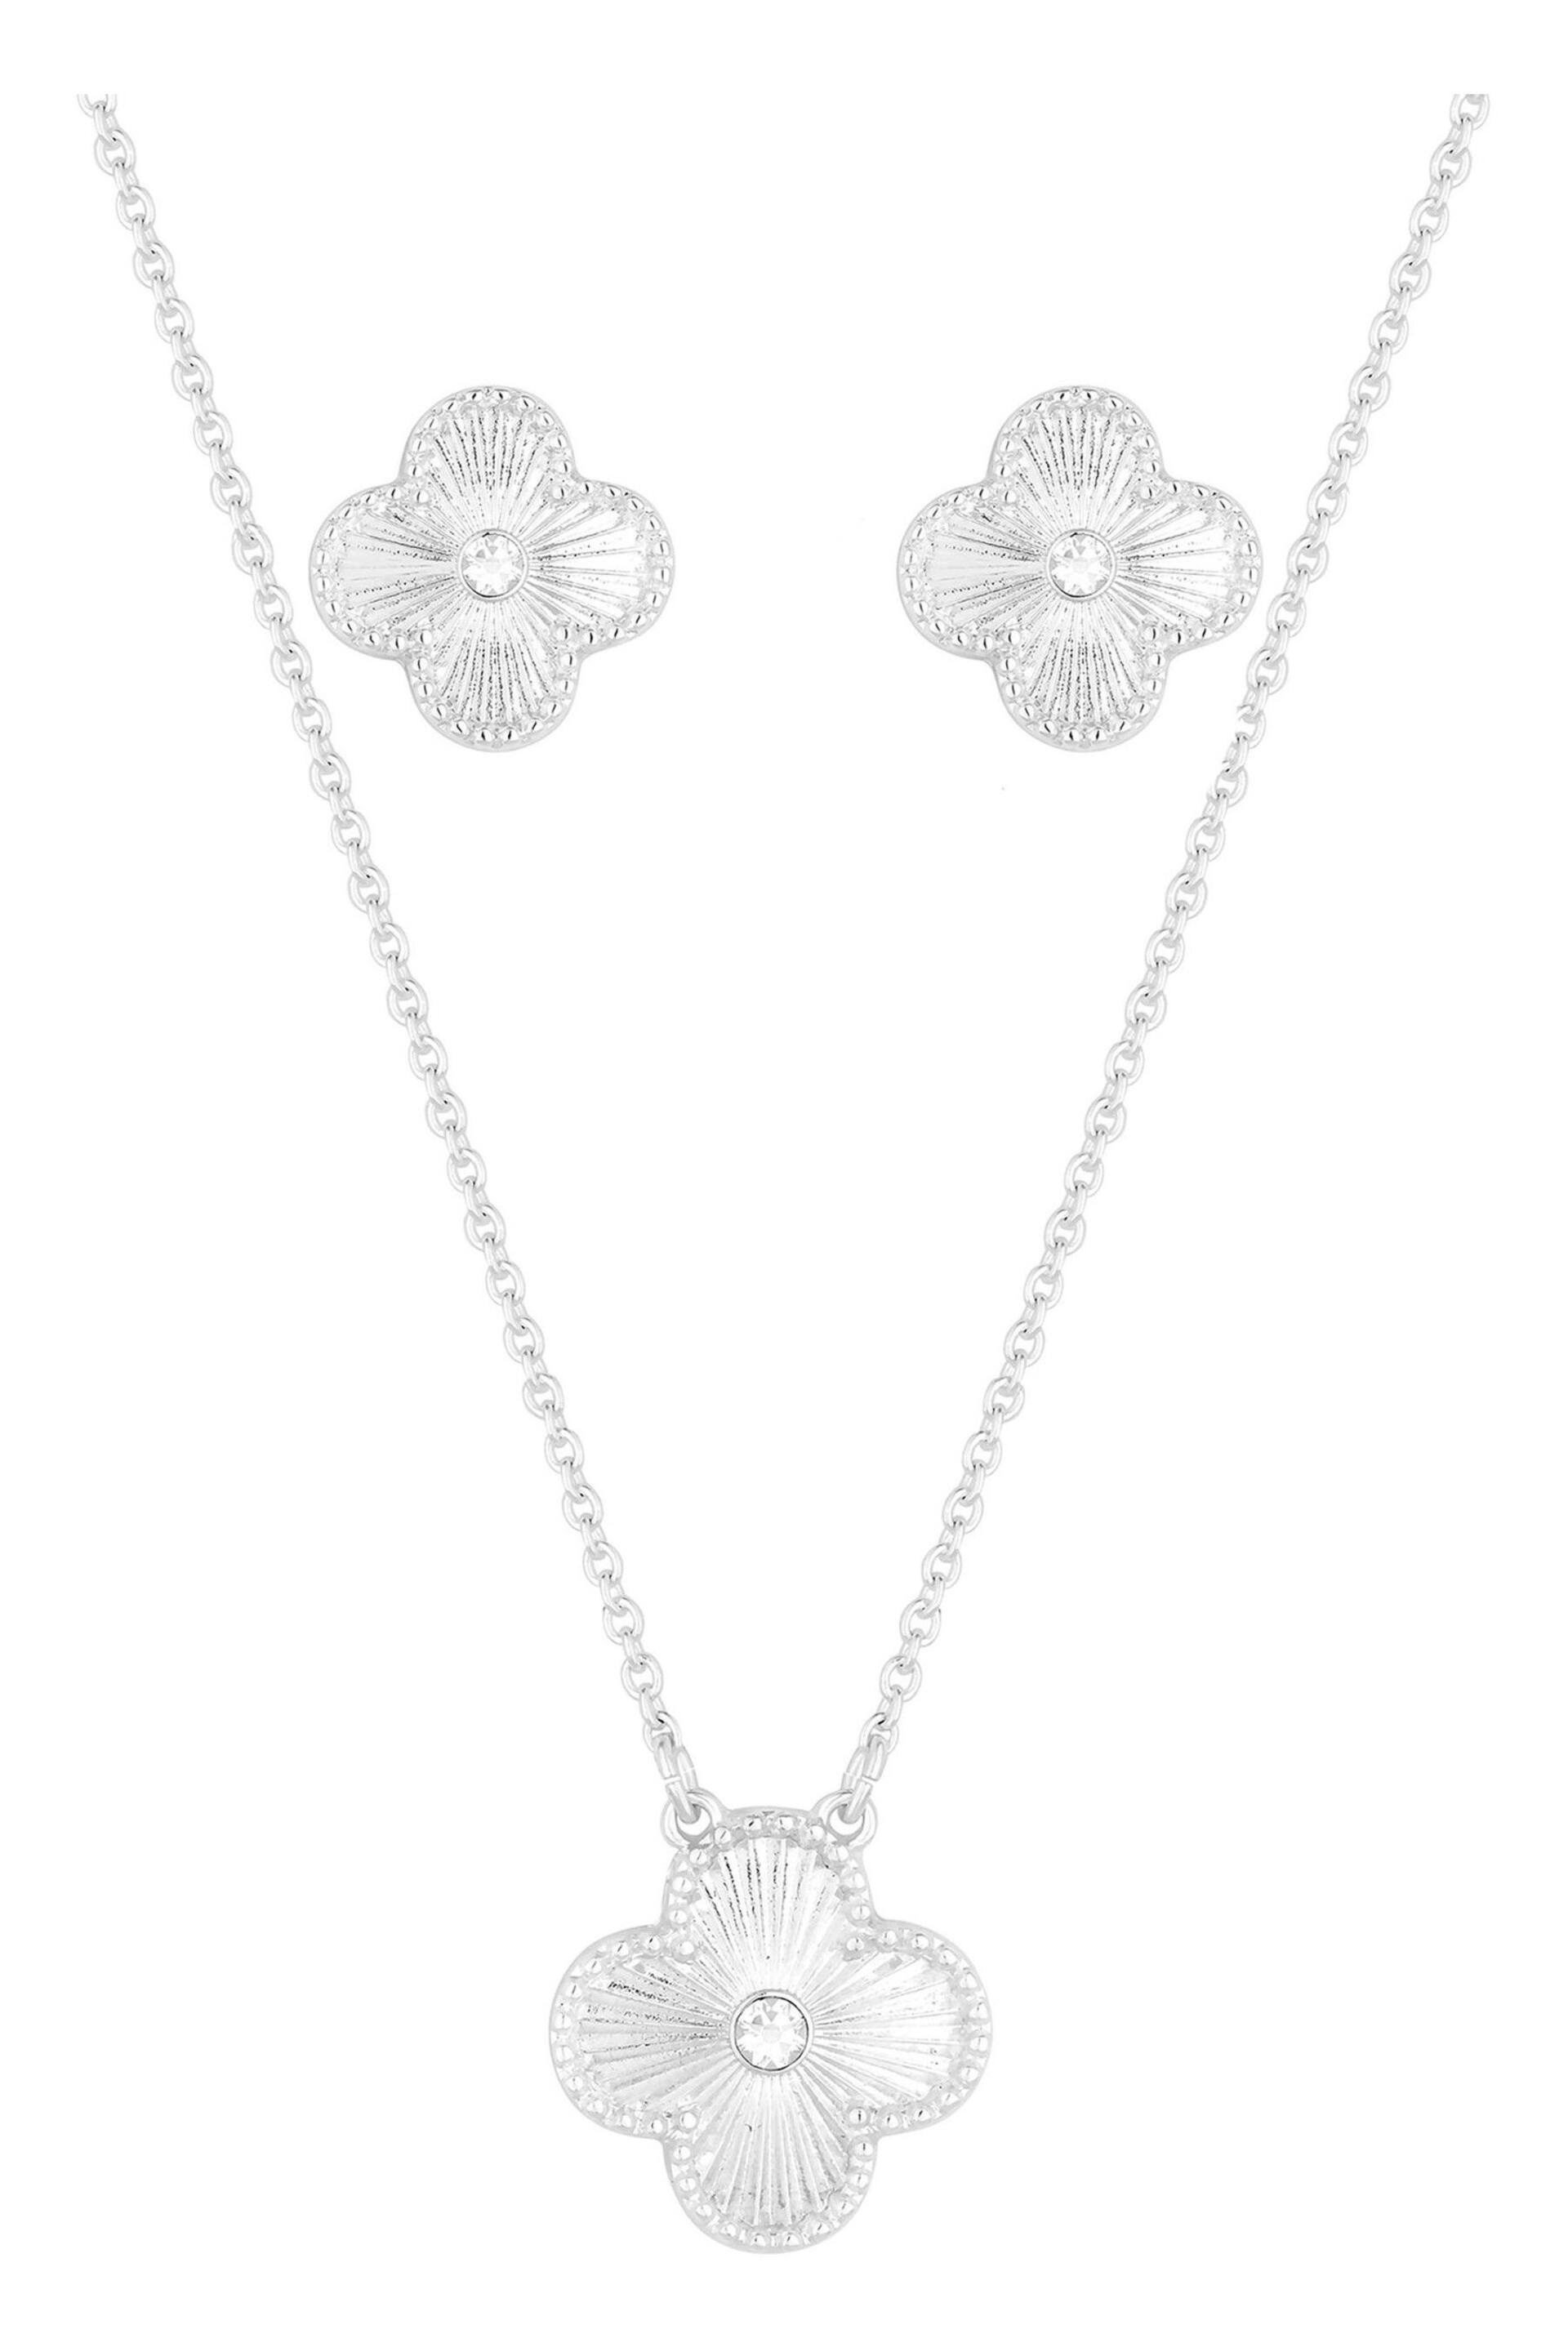 Lipsy Jewellery Silver Floral Clover Set - Gift Boxed - Image 2 of 4